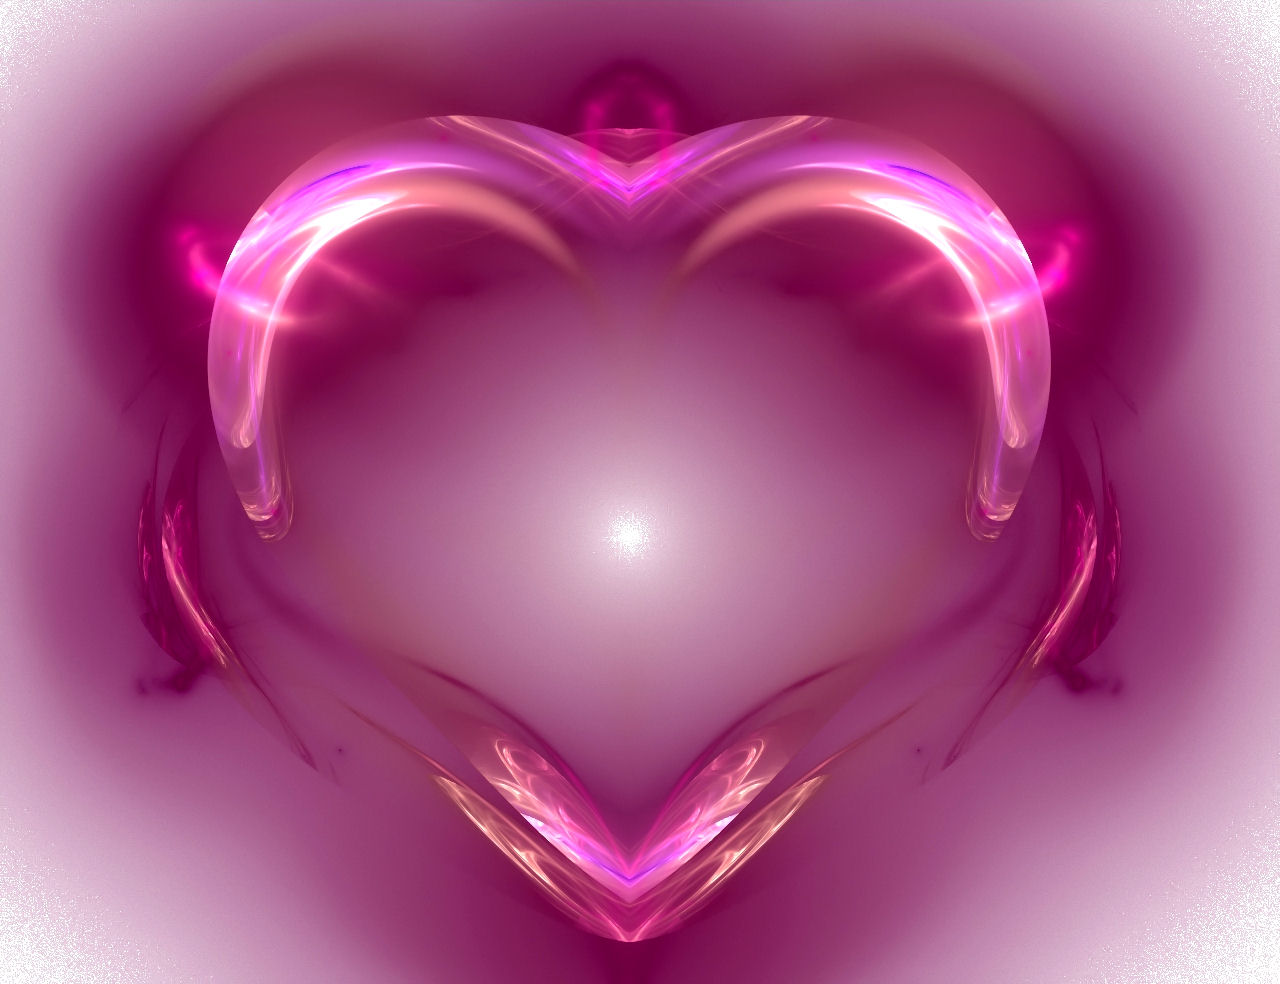 Heart Wallpaper here you can see Pink Abstract Heart Wallpaper